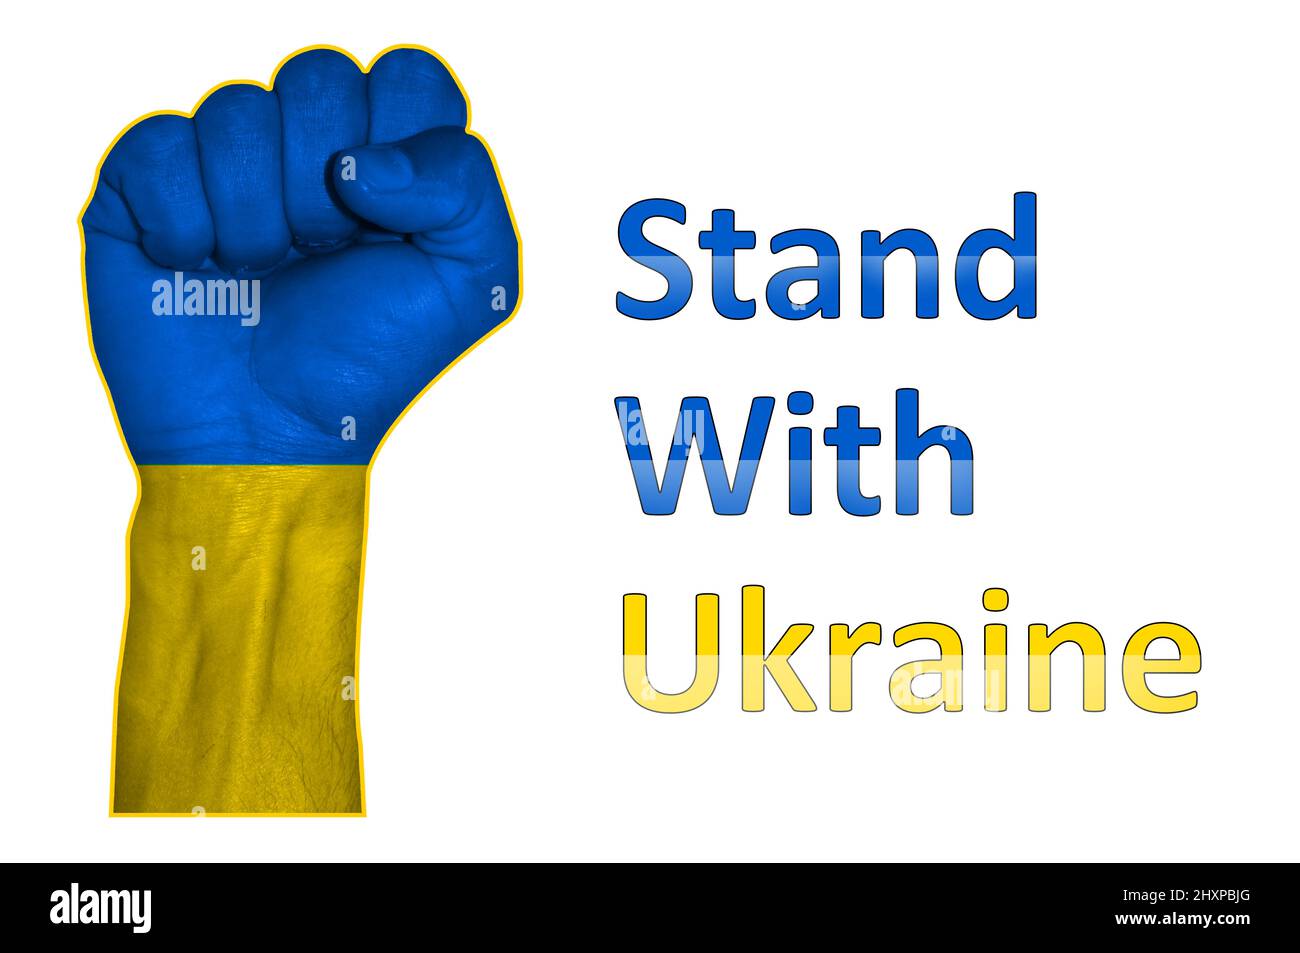 Solidarity with Ukraine abstract background with Ukraine flag painted on fist. Patriotic and togetherness concept. Stand with Ukraine backdrop. Stock Photo